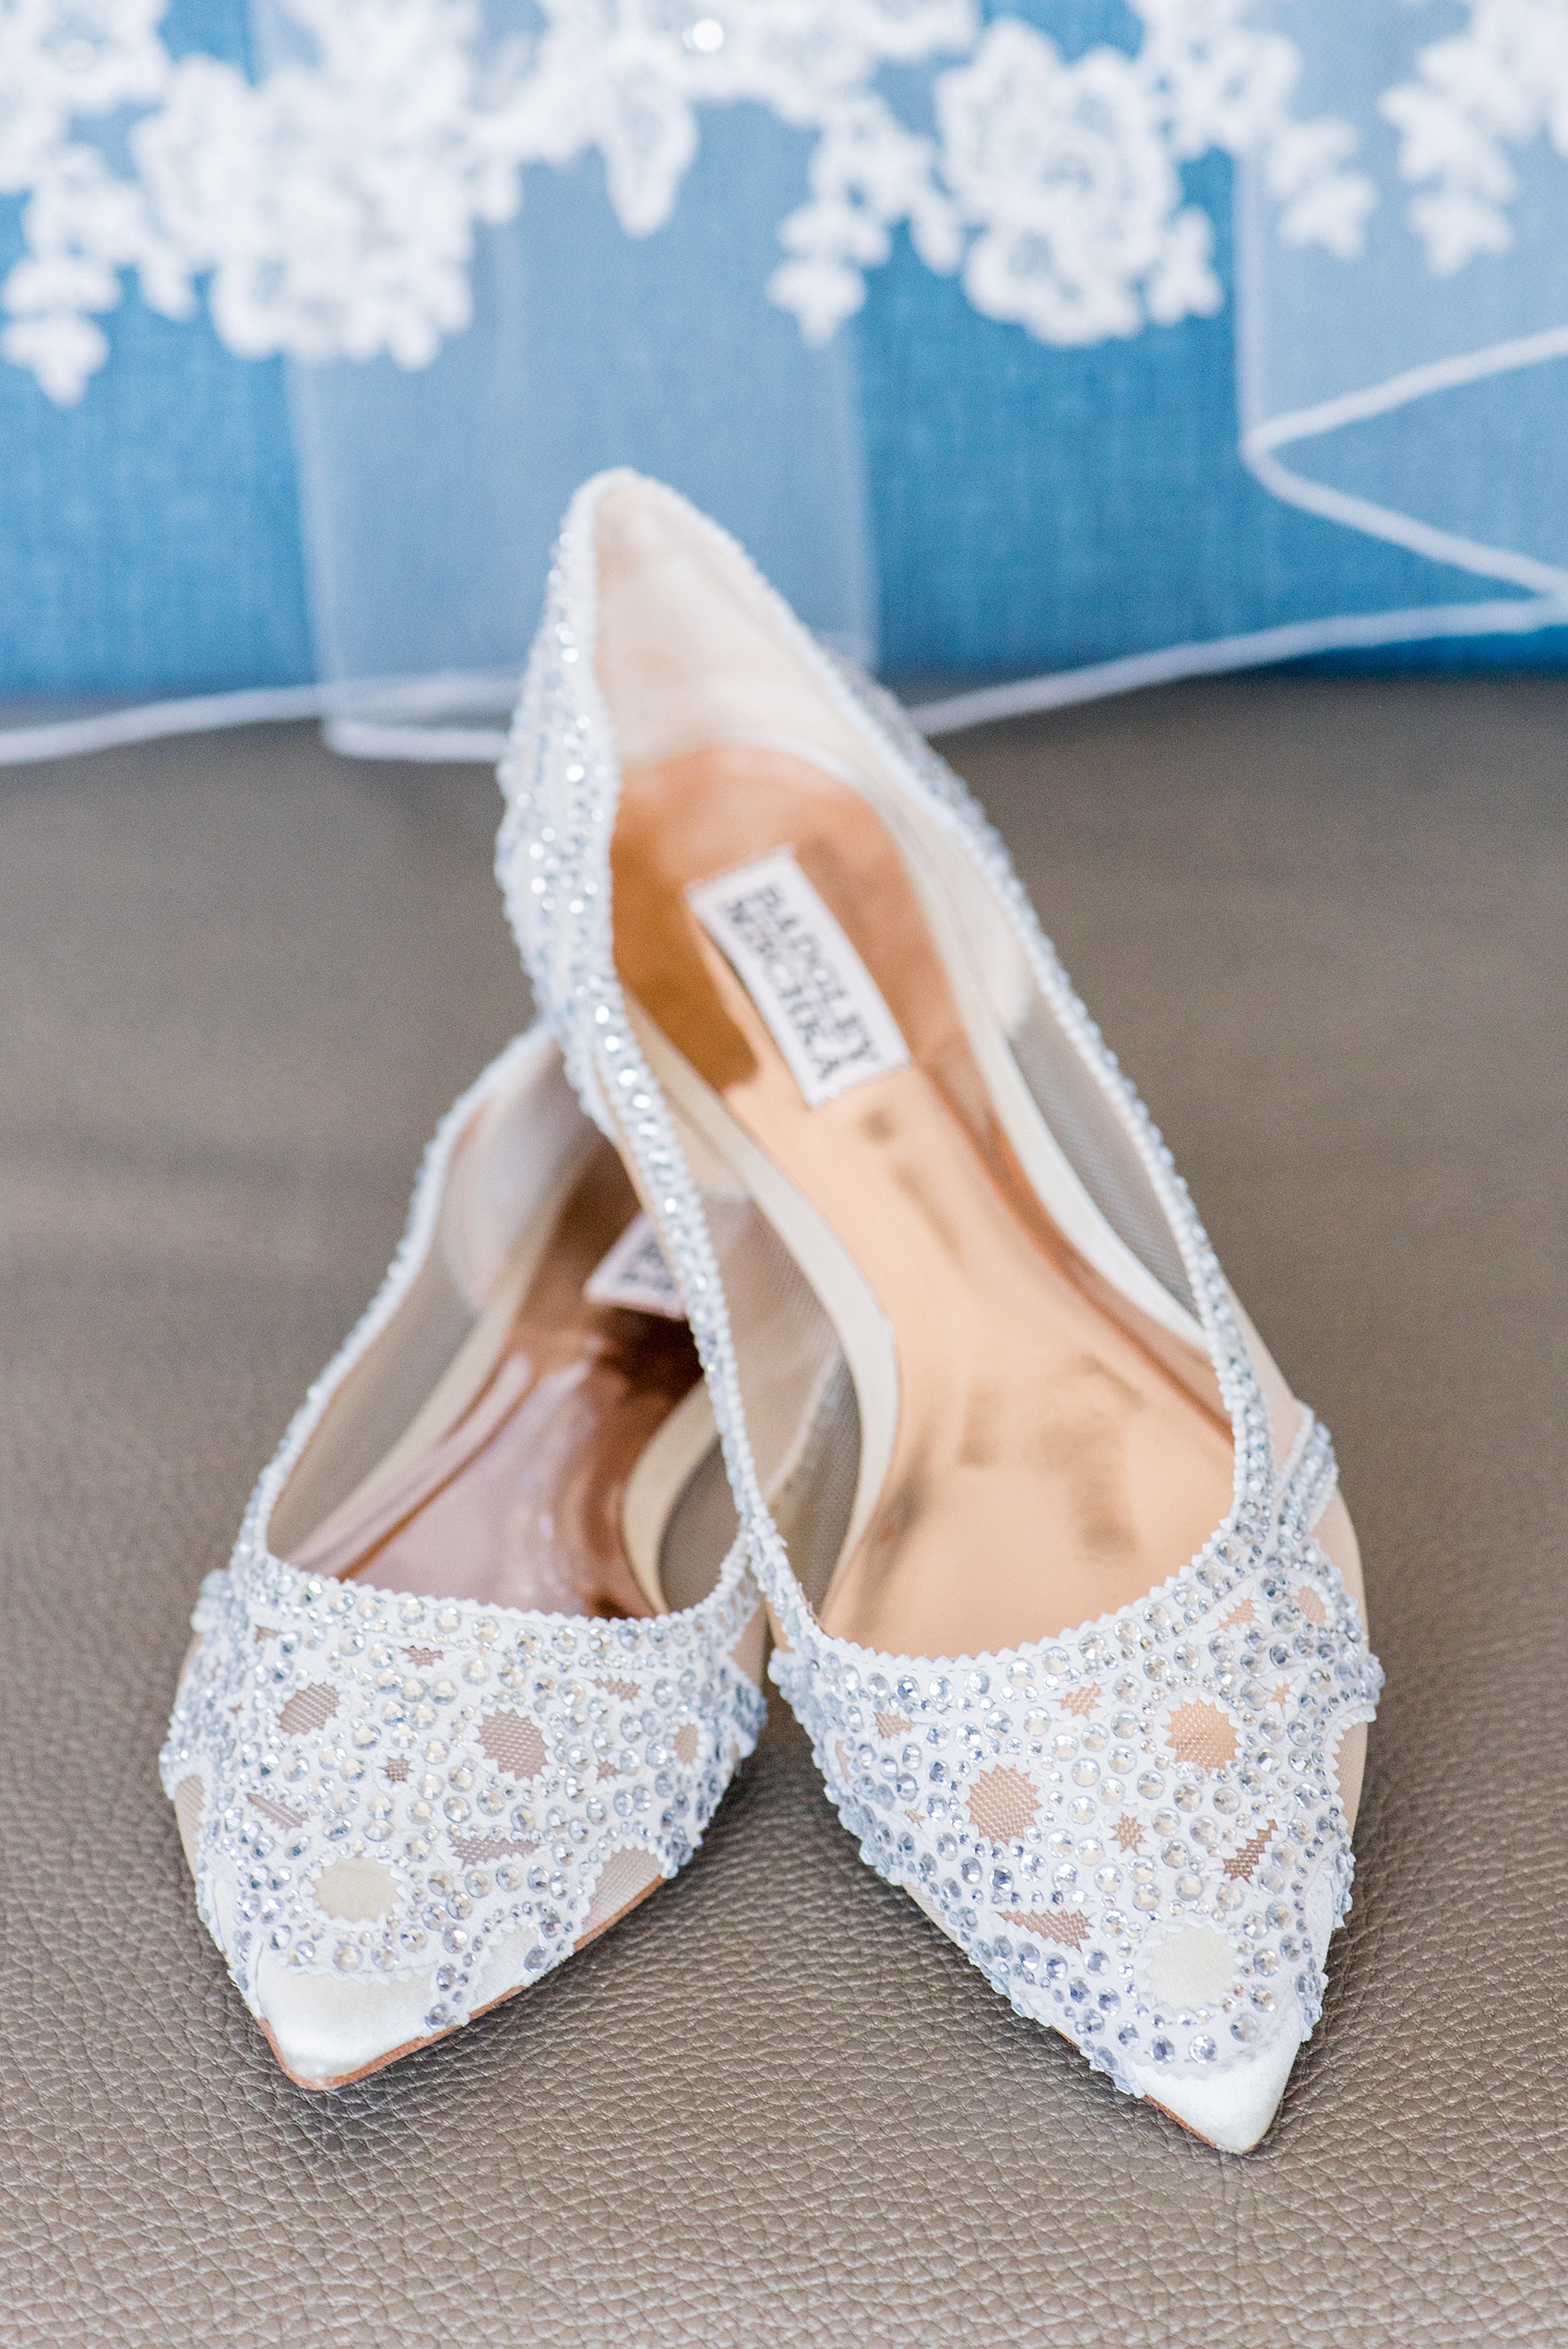 Saratoga Springs destination wedding photos by Mikkel Paige Photography. The bride wore rhinestone crystal Badgley Mischka flats for her April spring wedding. #SaratogaSpringsNY #SaratogaSprings #mikkelpaige #NYwedding #destinationwedding 